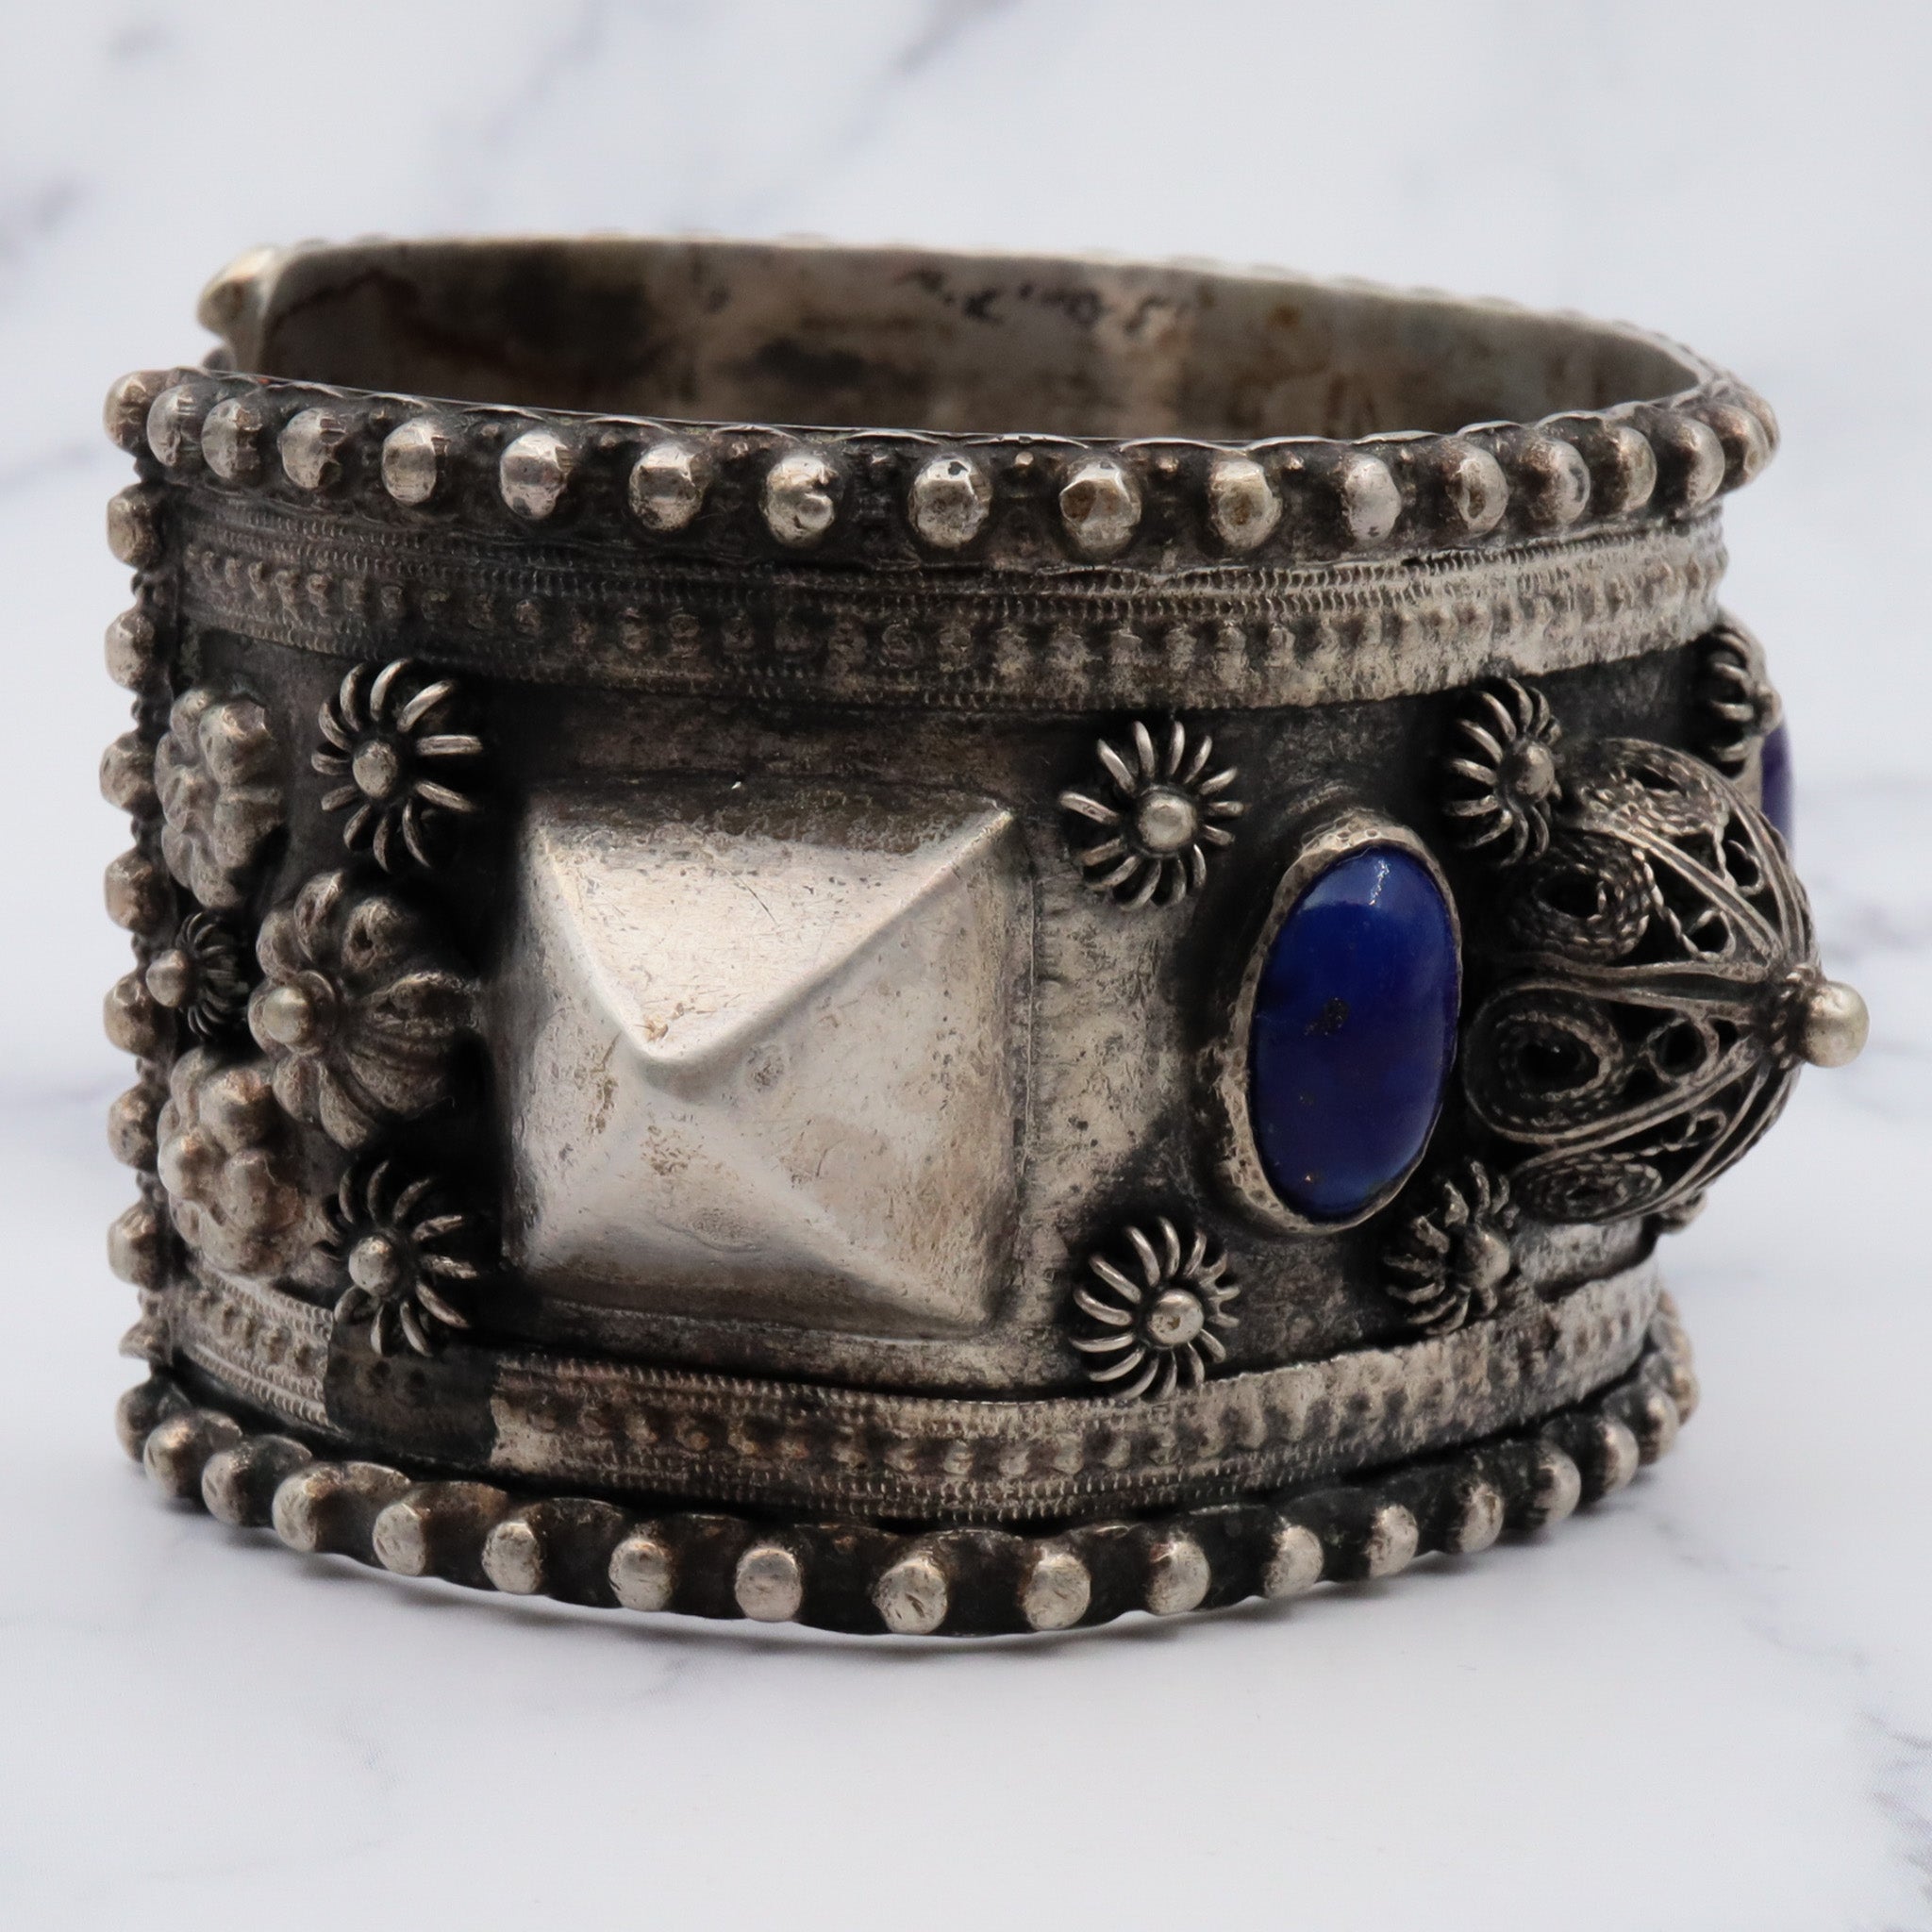 Antique Egyptian silver chunky tribal silver bangle with lapis art glass and cannetille filigree